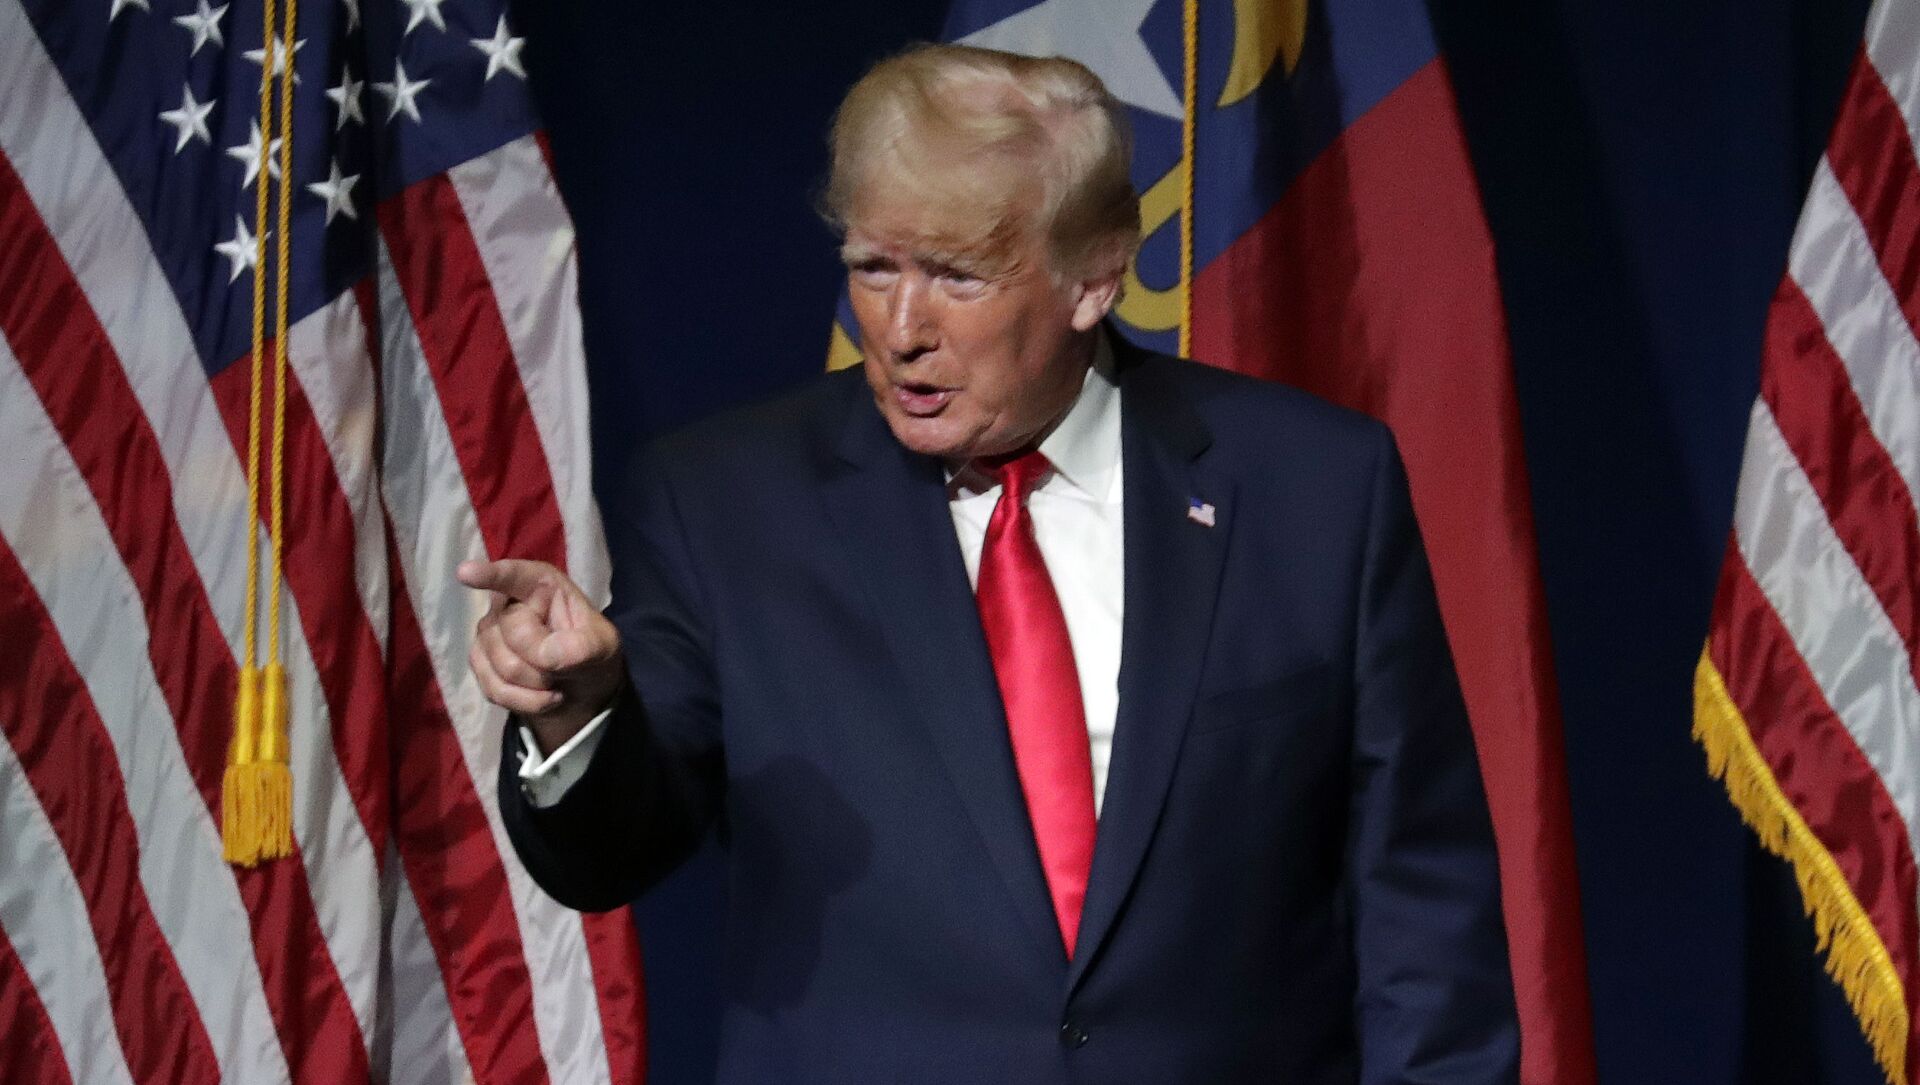 Former President Donald Trump acknowledges the crowd before he speaks at the North Carolina Republican Convention Saturday, June 5, 2021, in Greenville, N.C. - Sputnik International, 1920, 17.06.2021